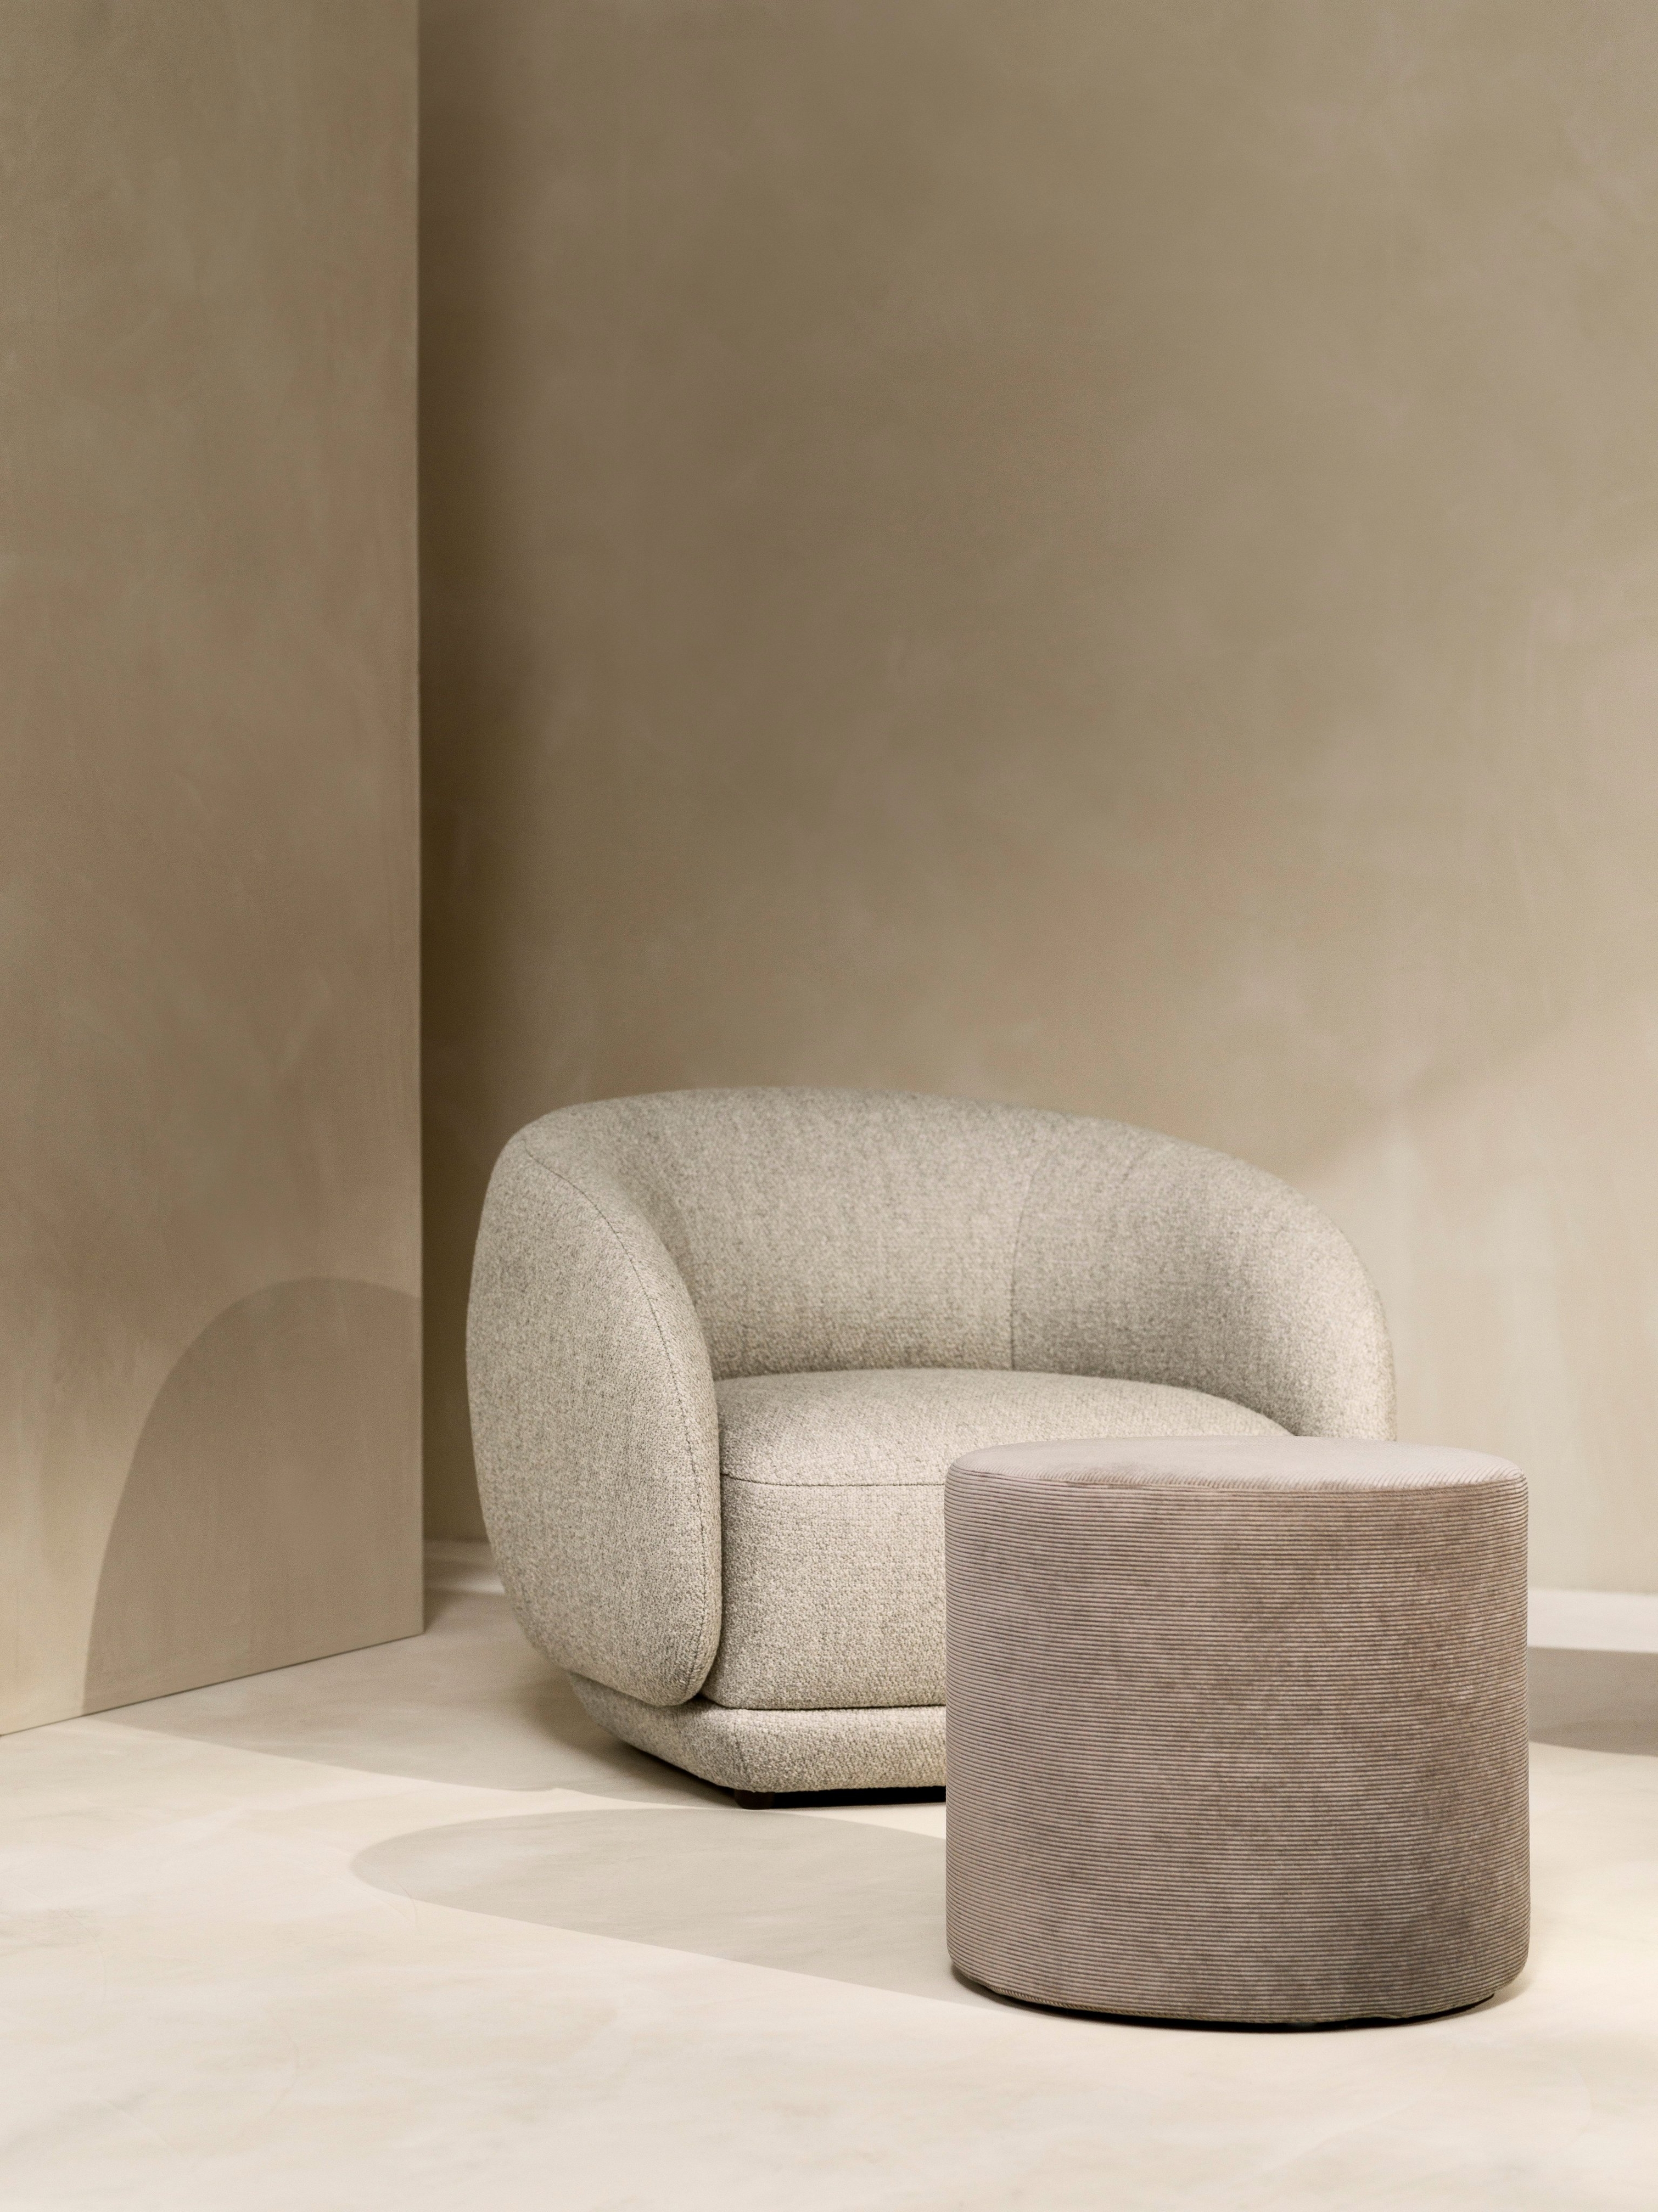 Quiet corner with the Bolzano armchair in beige Lazio fabric and the Eden footstool in sand Skagen fabric.